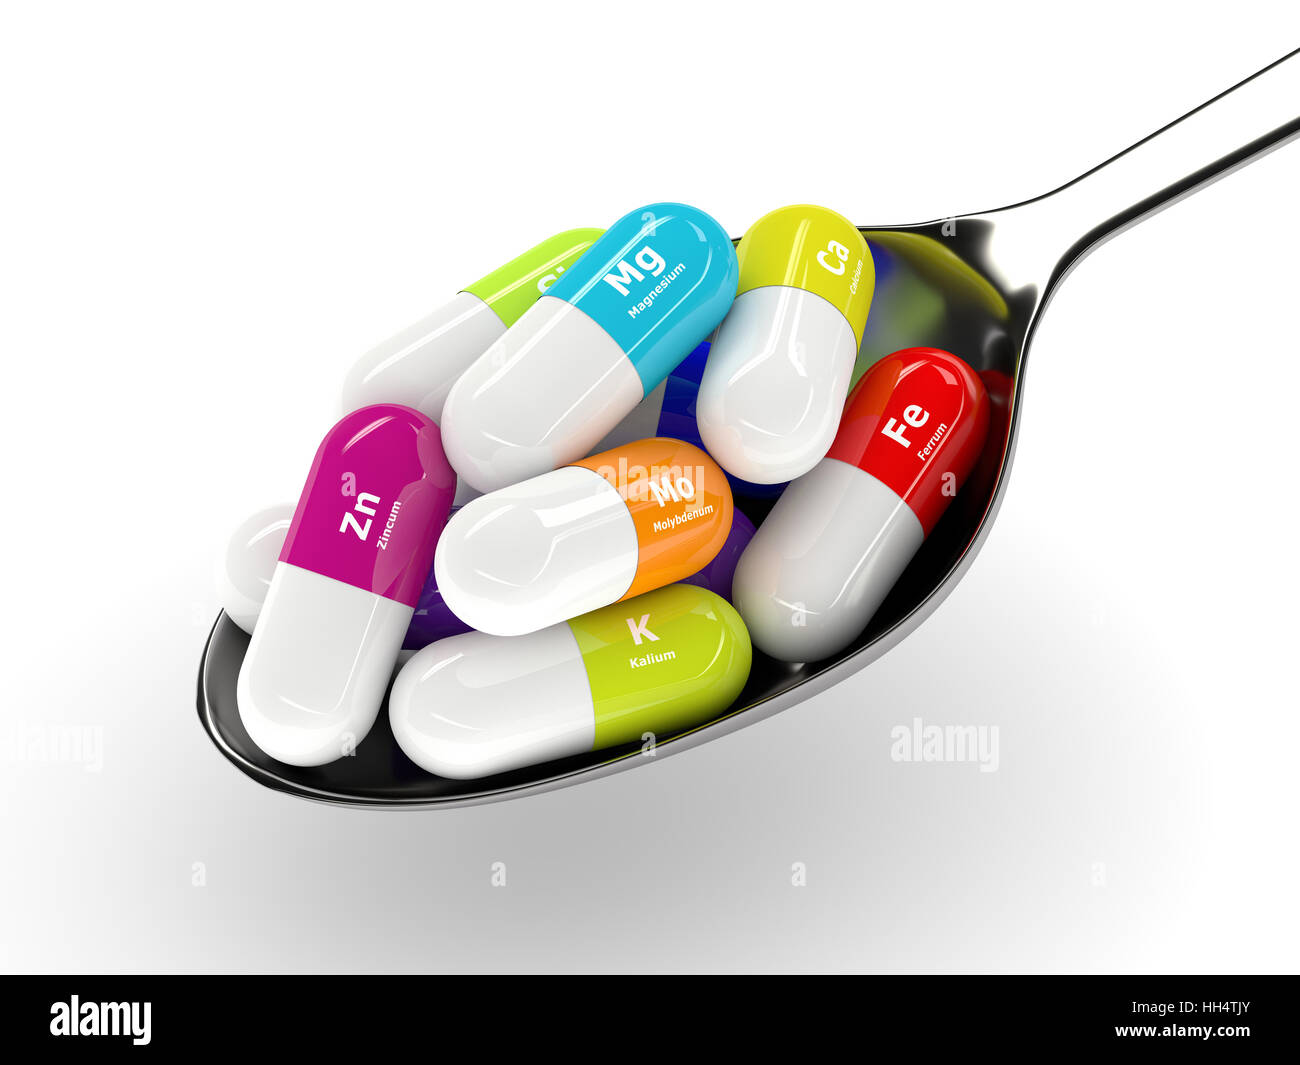 3d rendering of dietary supplements on spoon isolated over white background Stock Photo